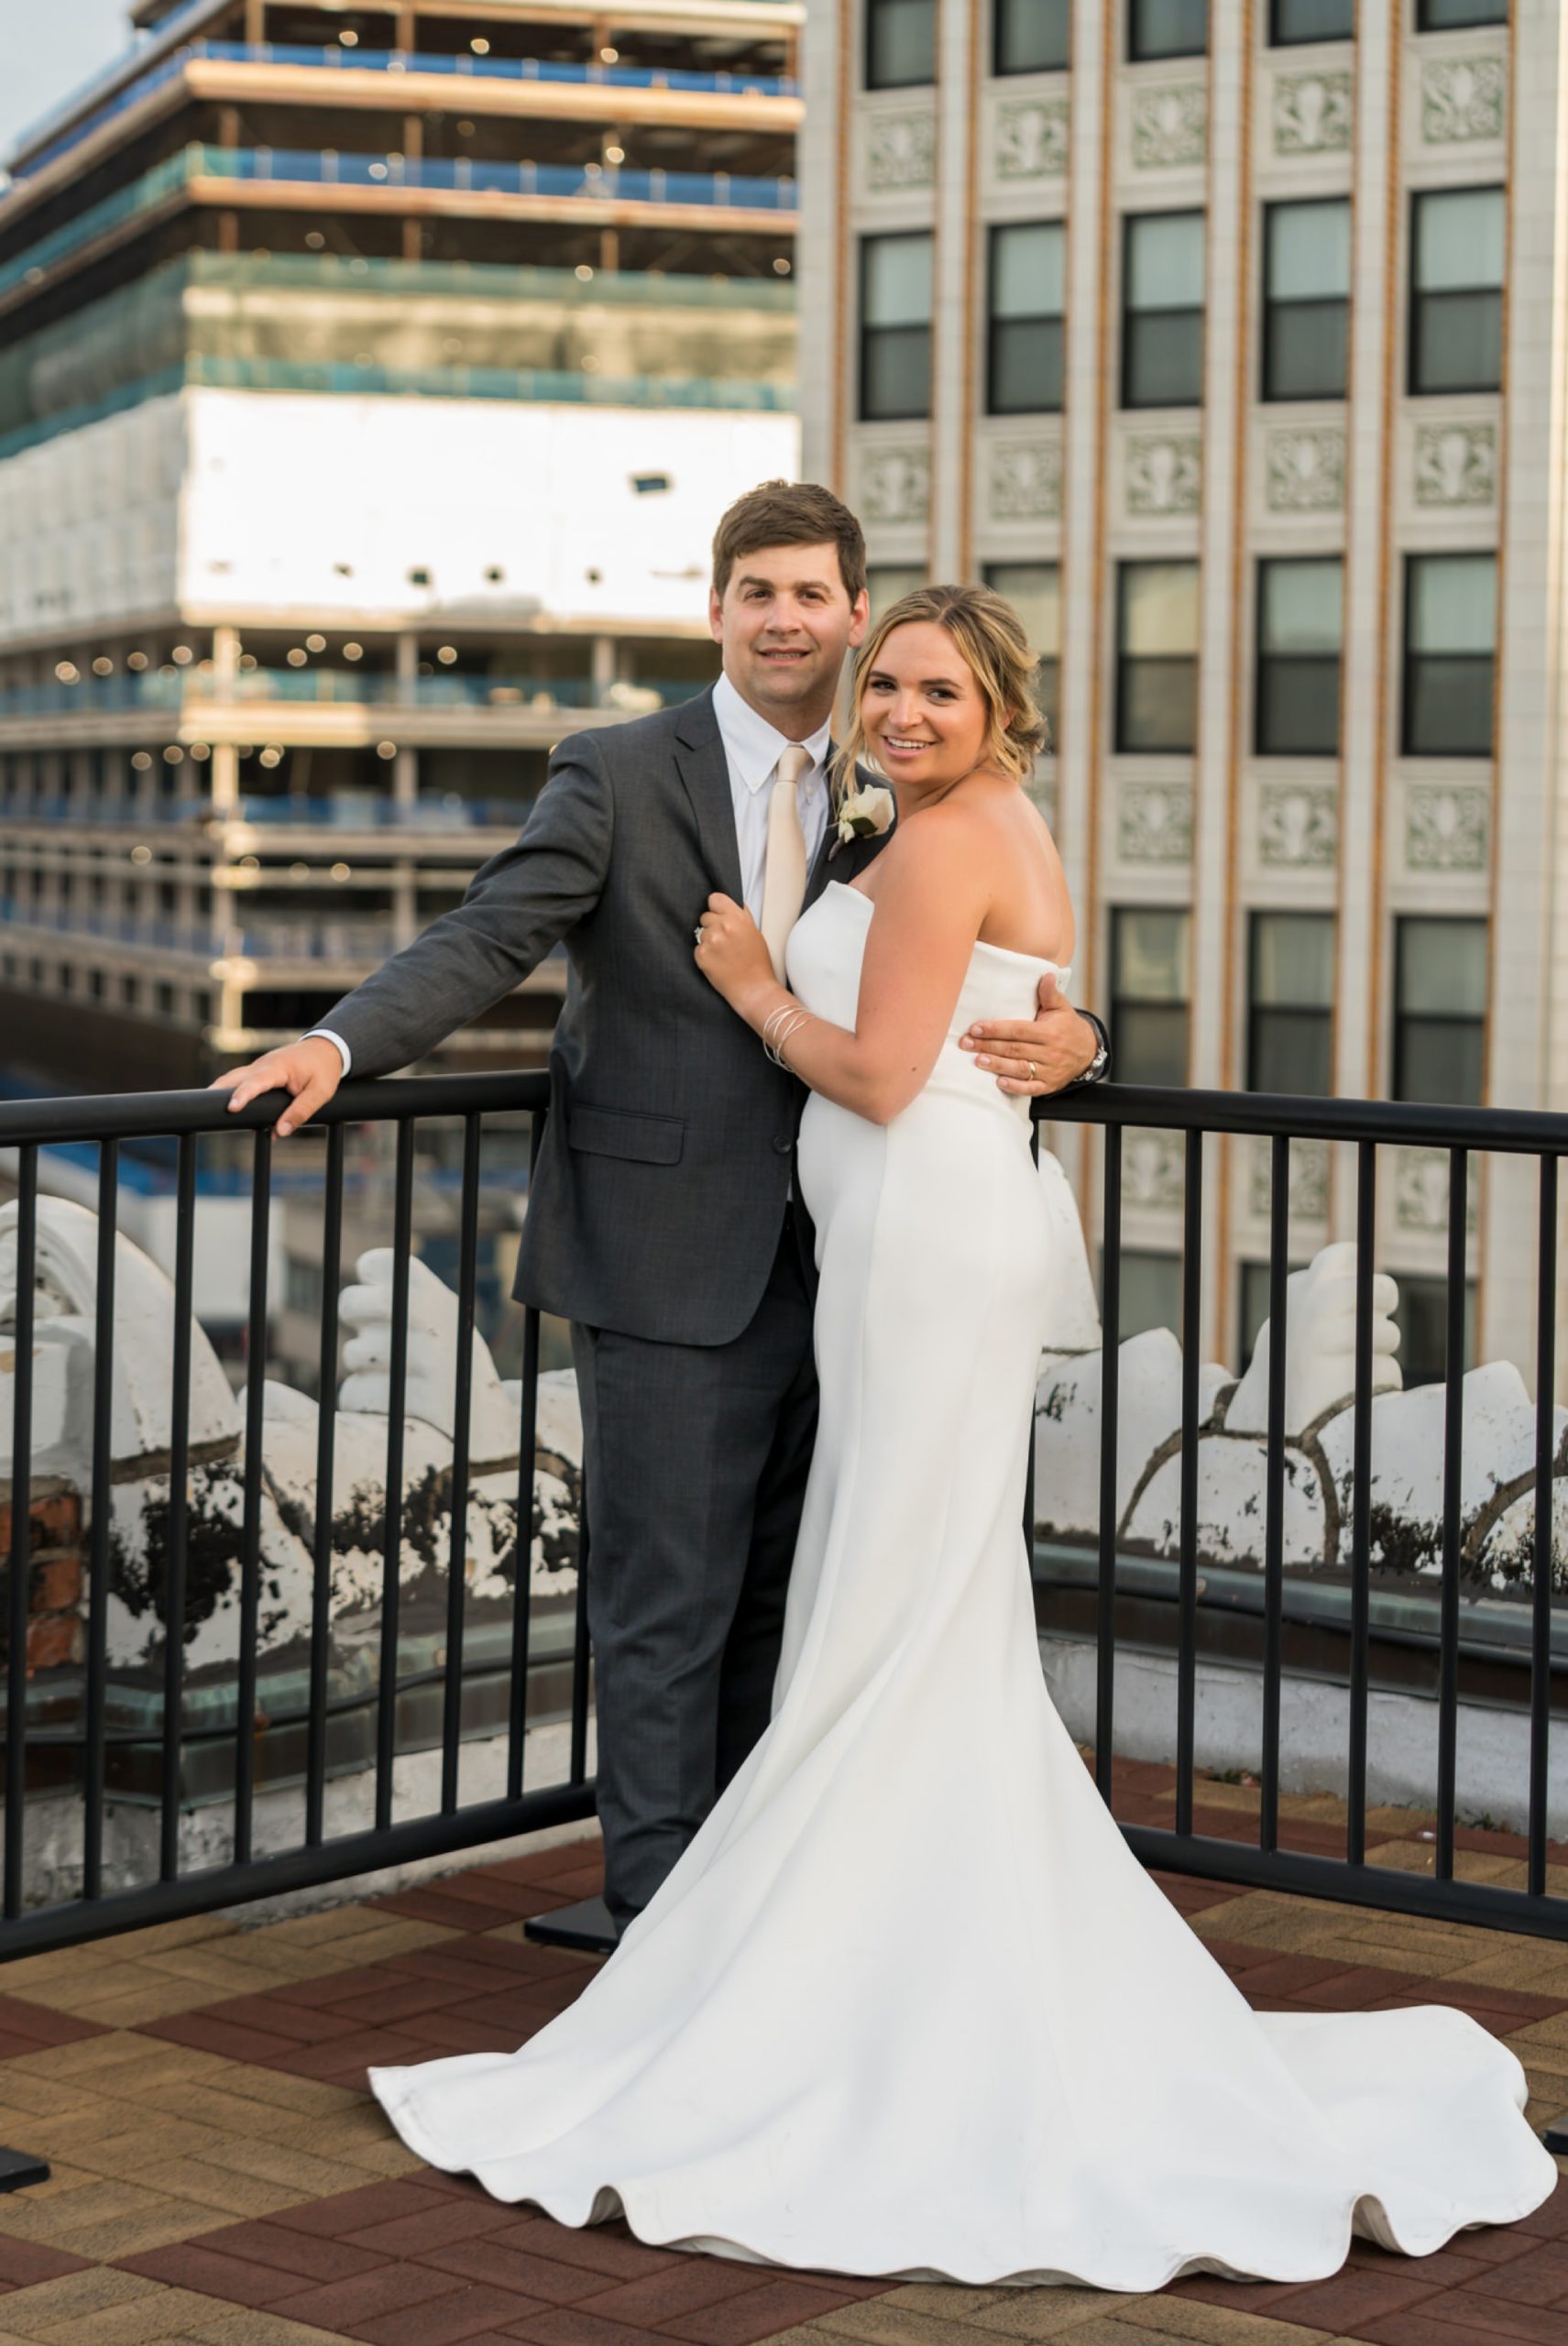 bride and groom embrace with buildings in the background at a wedding at Detroit Opera House